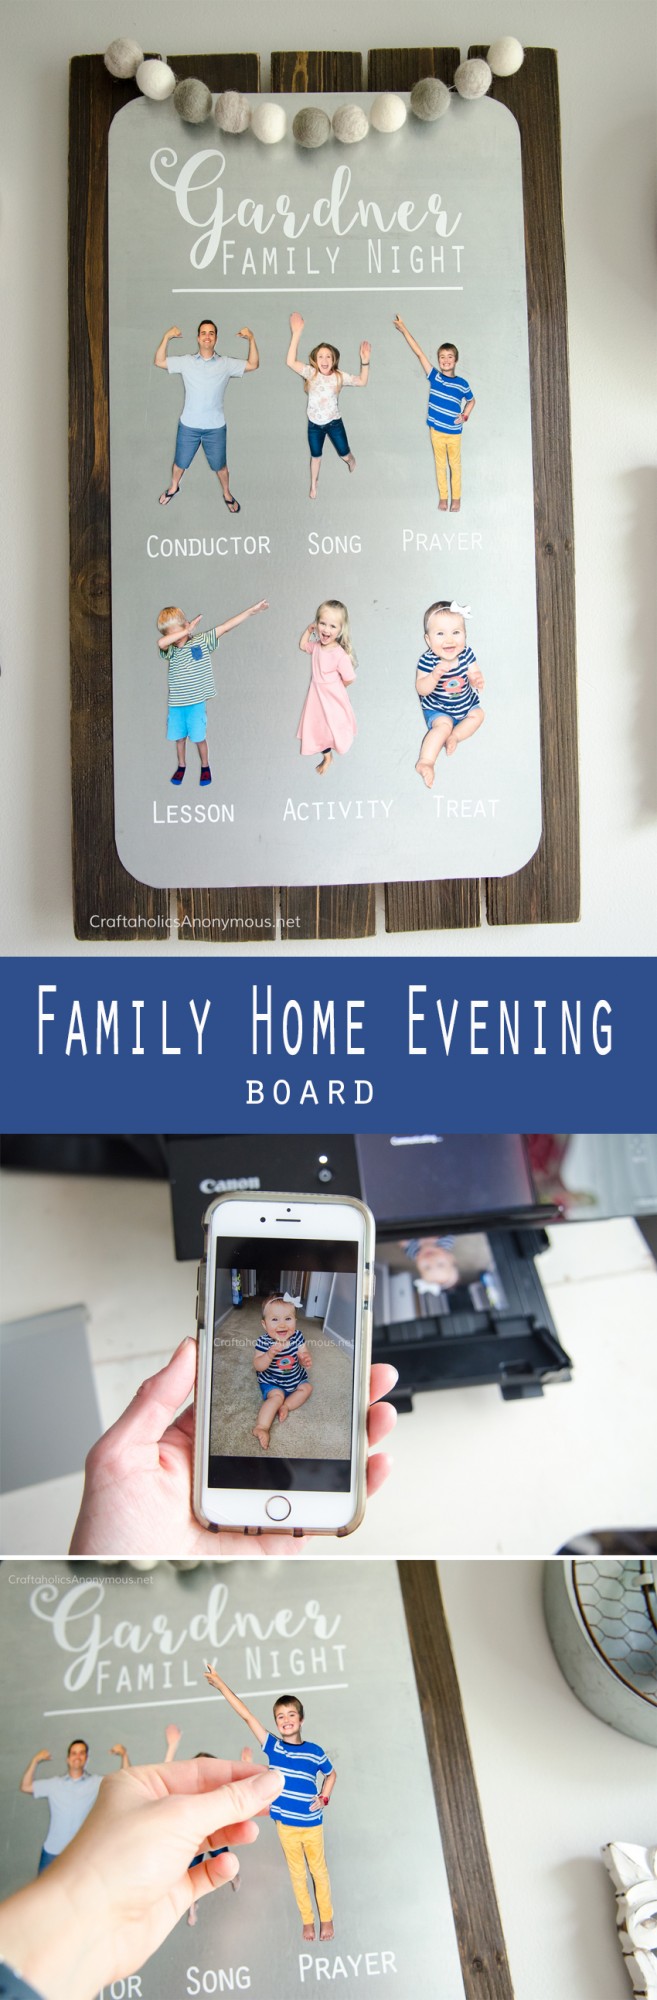 DIY FHE Board tutorial. Such a great idea to make people magnets!